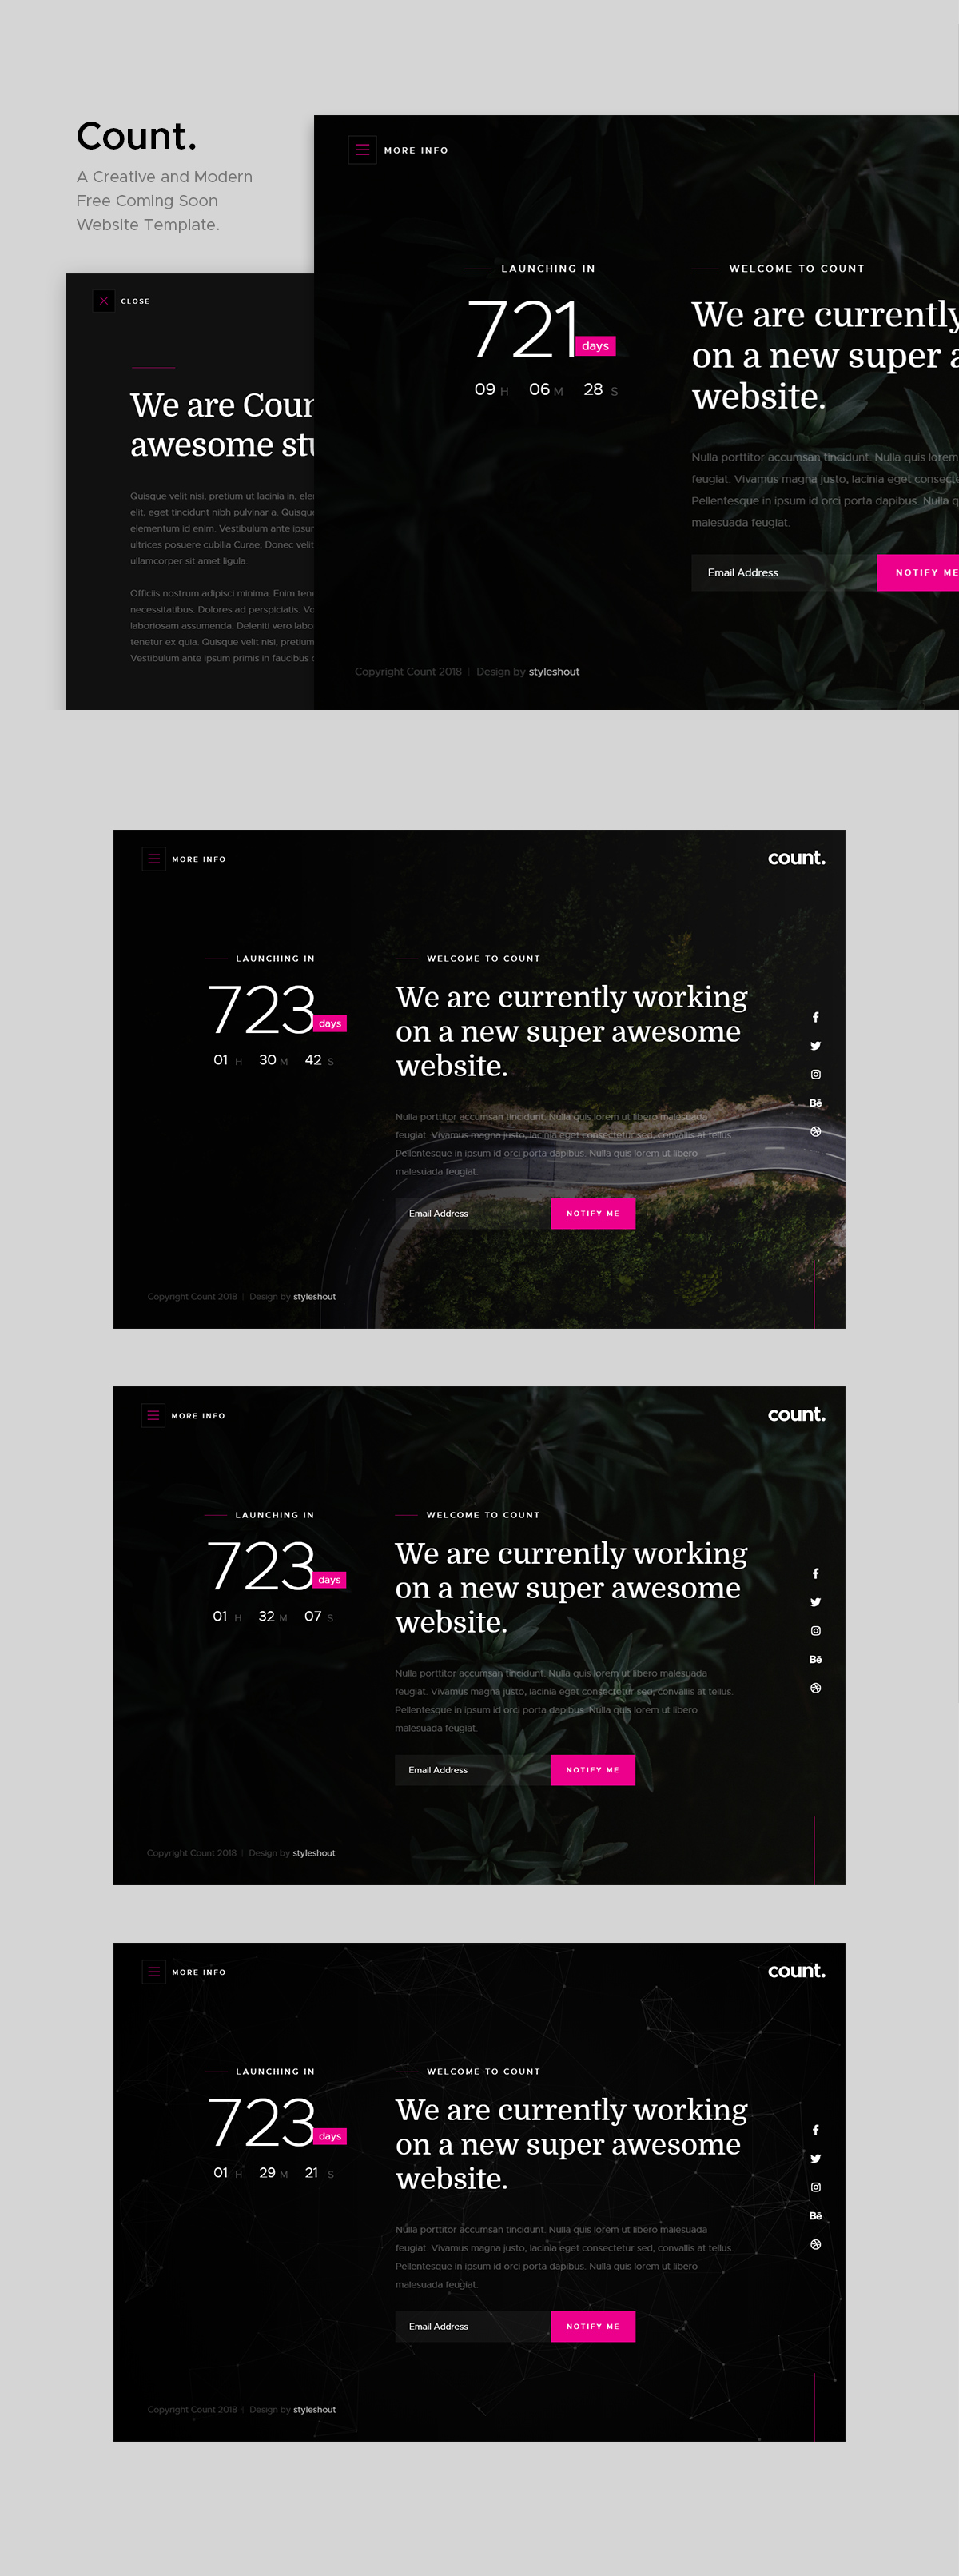 Count: Creative and Modern Coming Soon Website Template